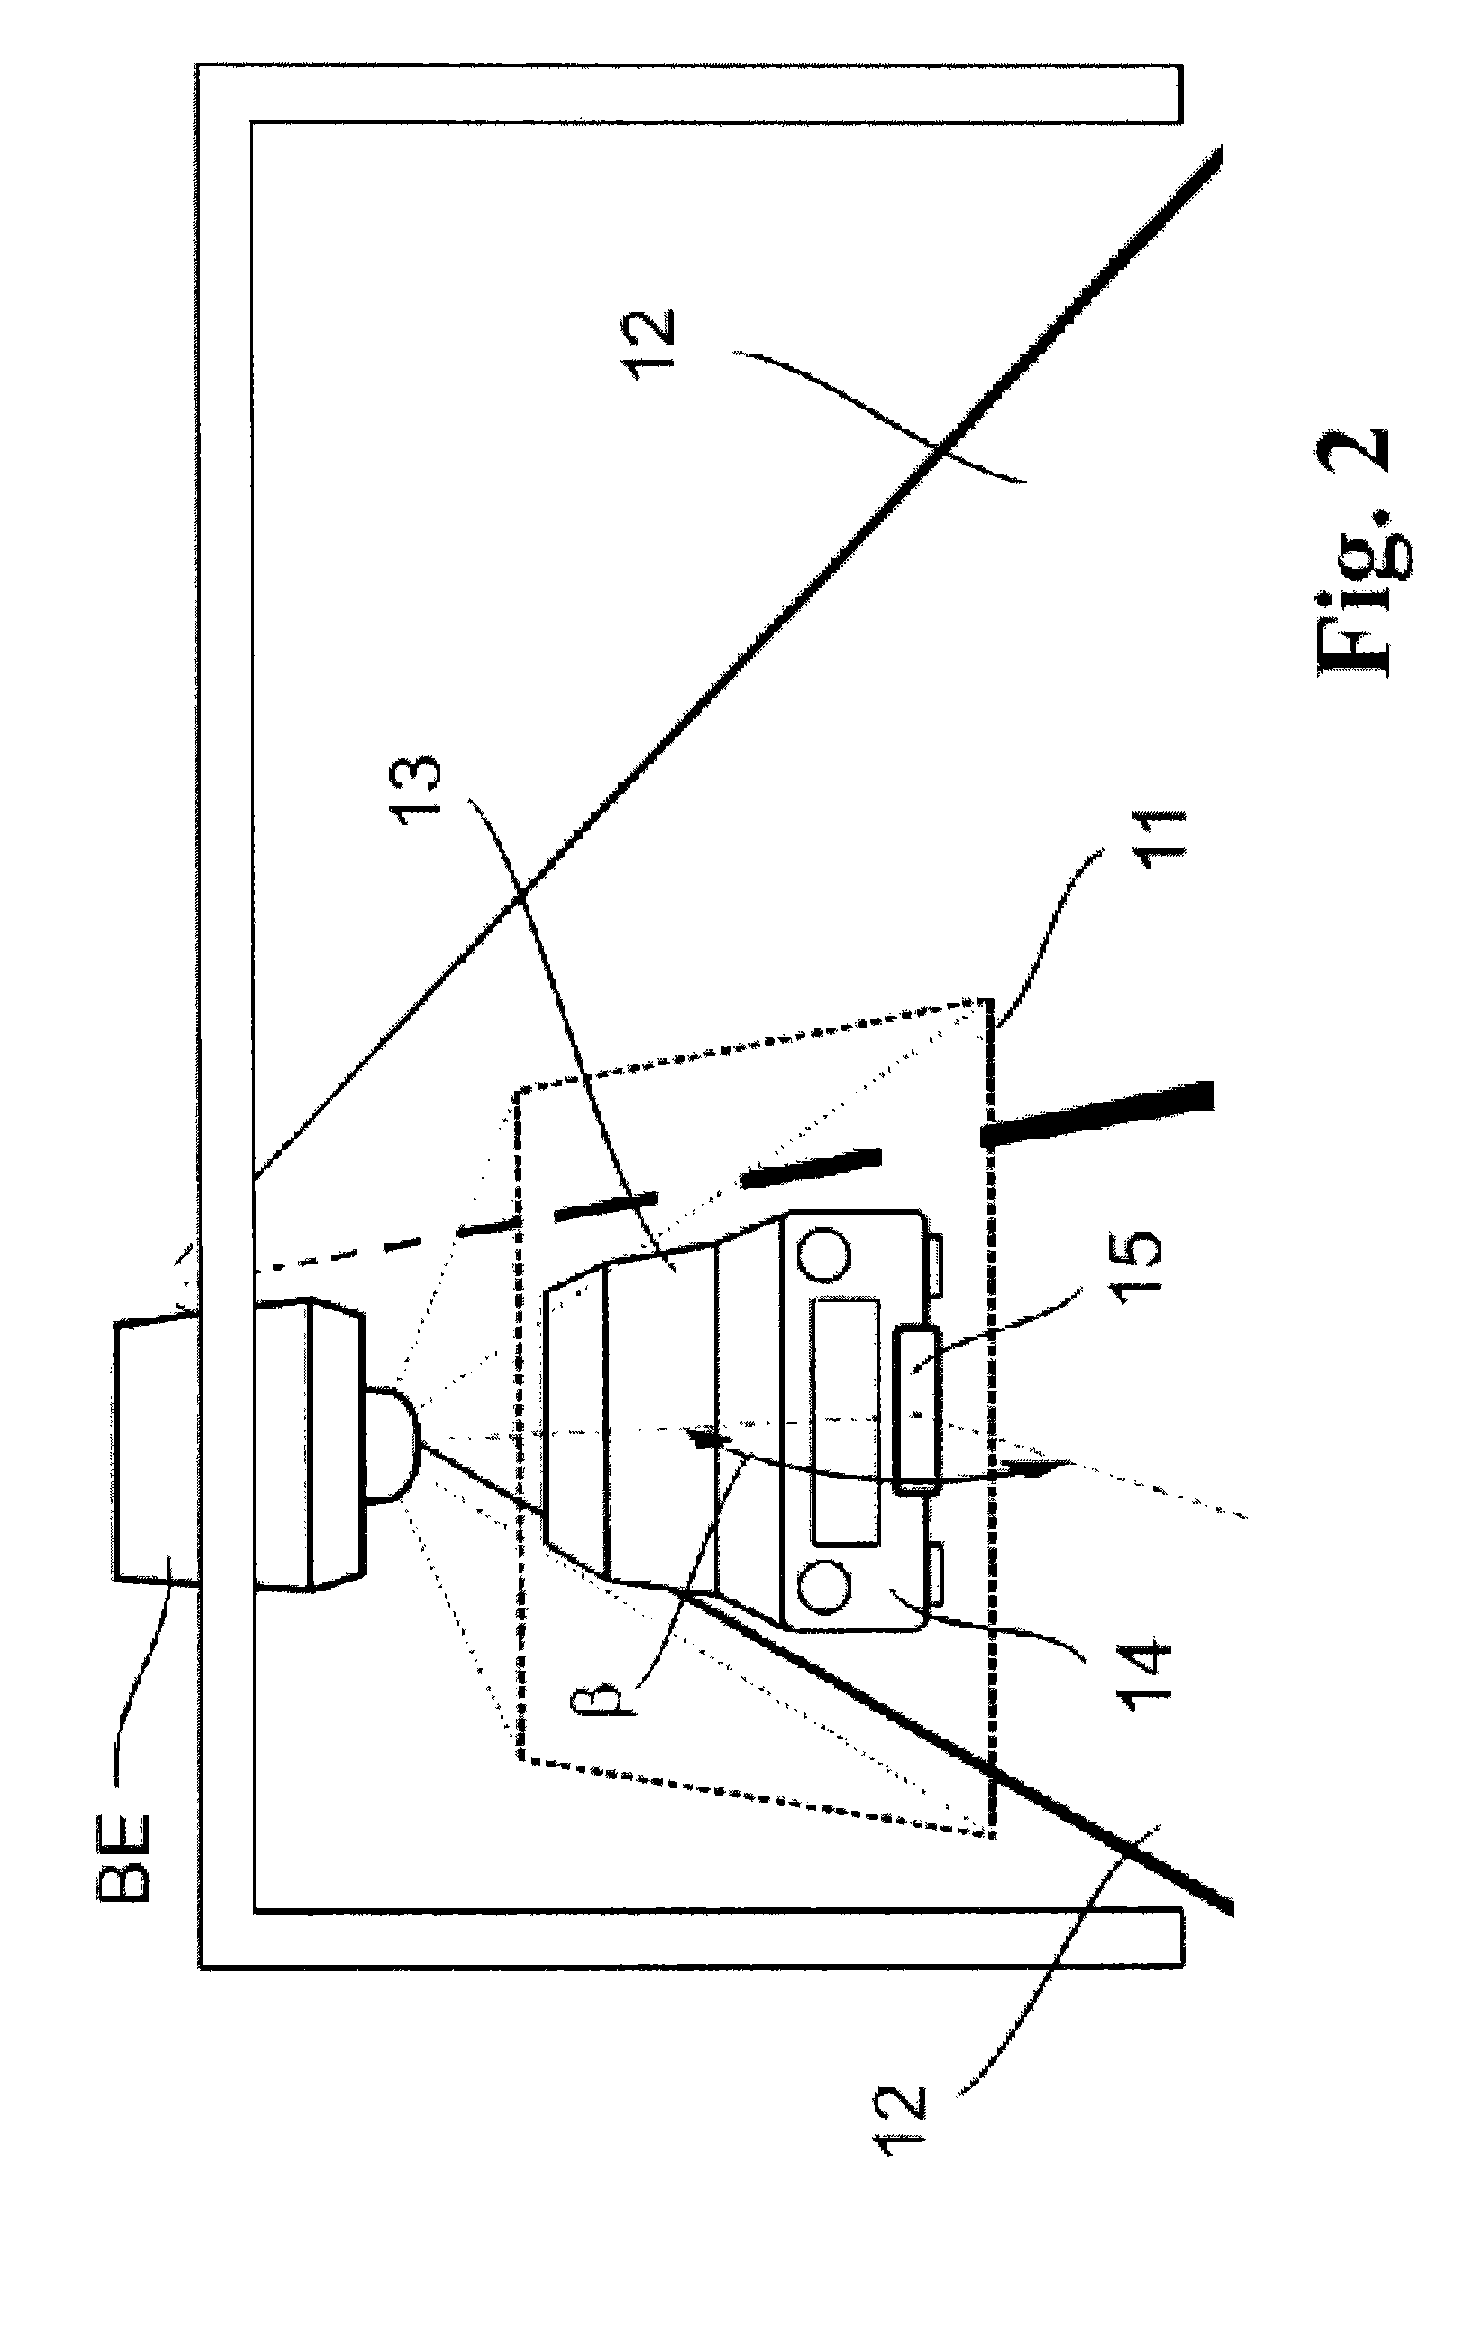 Method and apparatus for identifying motor vehicles for monitoring traffic